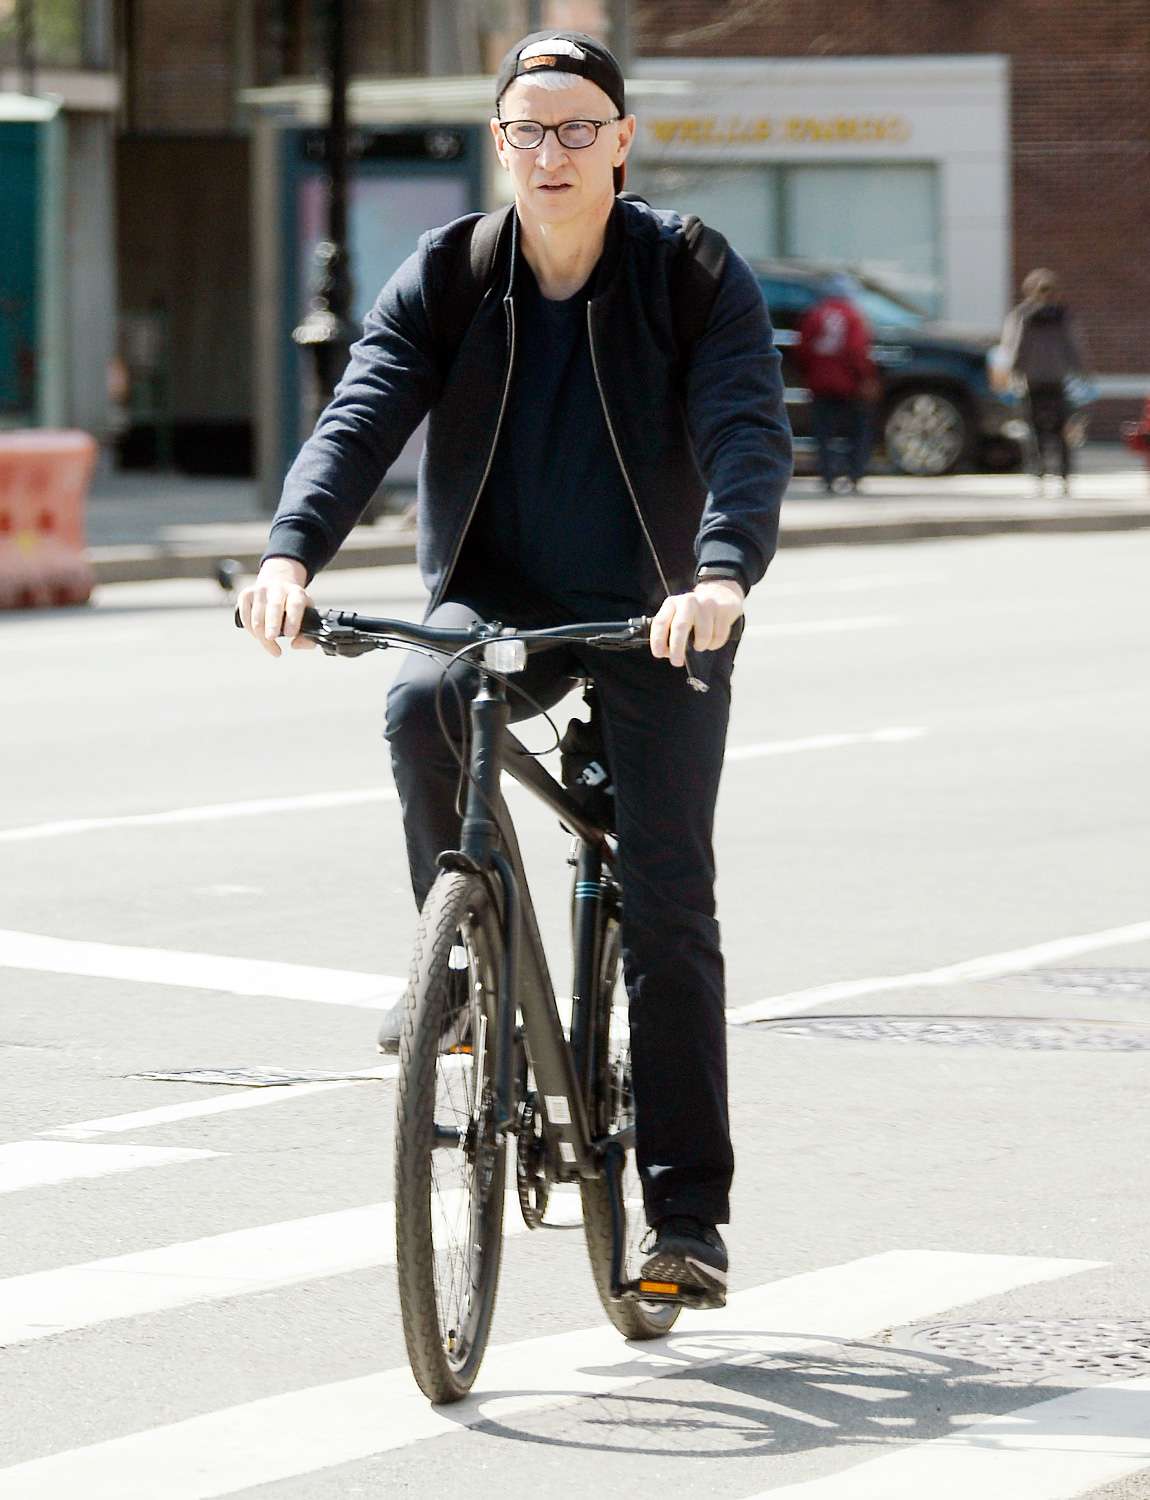 Anderson Cooper seen biking without any face mask or protective covering amidst the Corona Virus pandemic in New York City